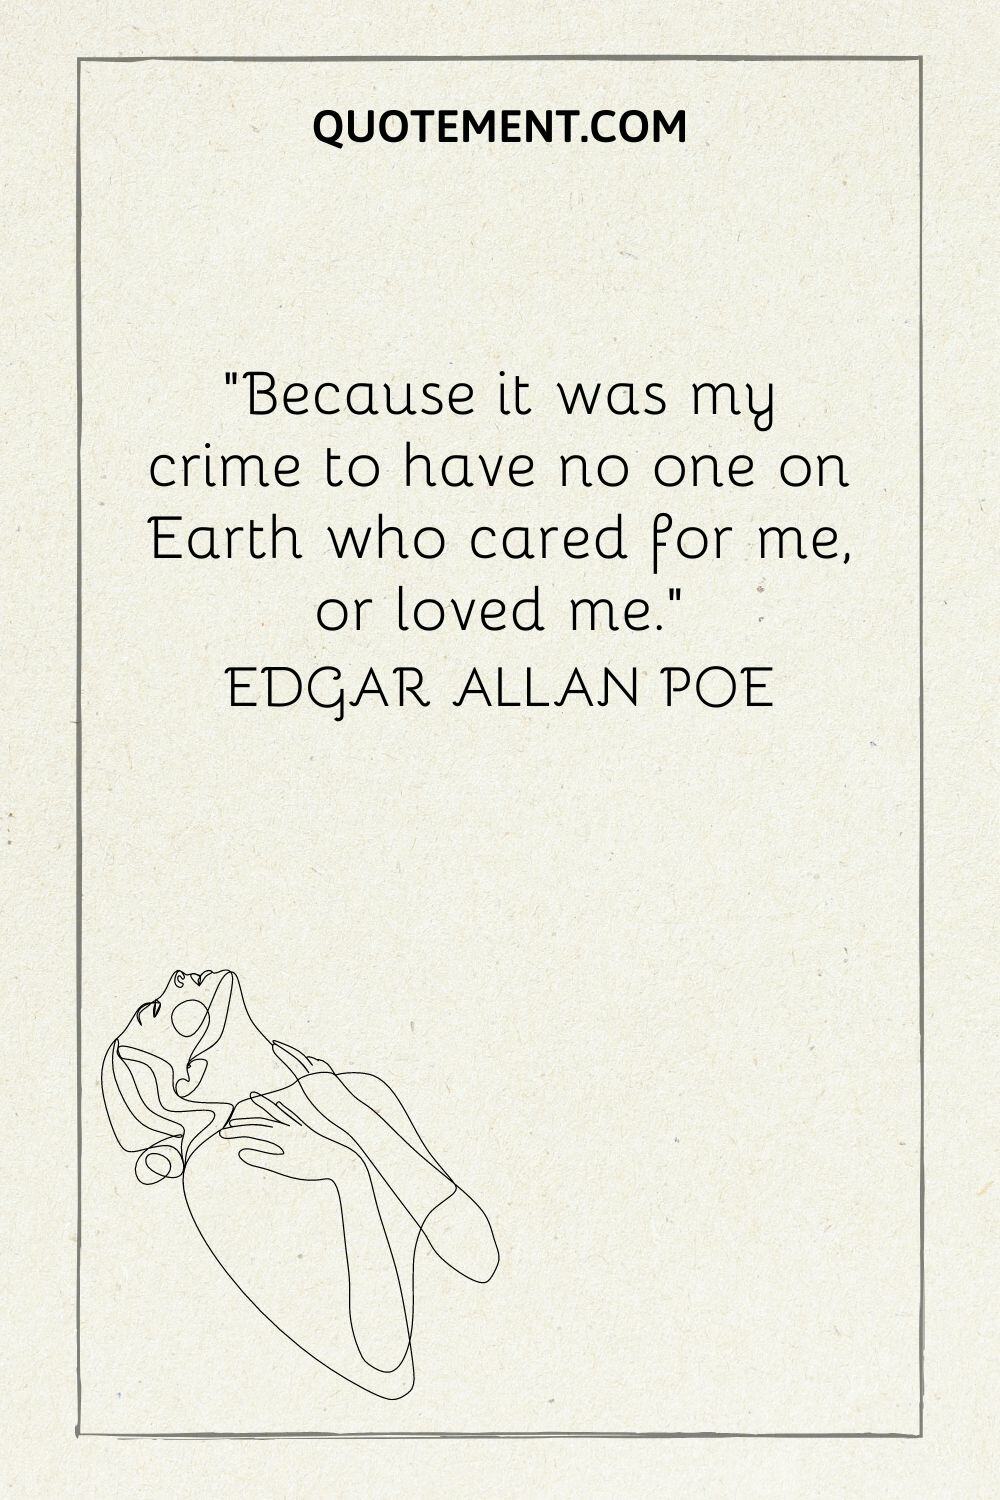 “Because it was my crime to have no one on Earth who cared for me, or loved me.”― Edgar Allan Poe